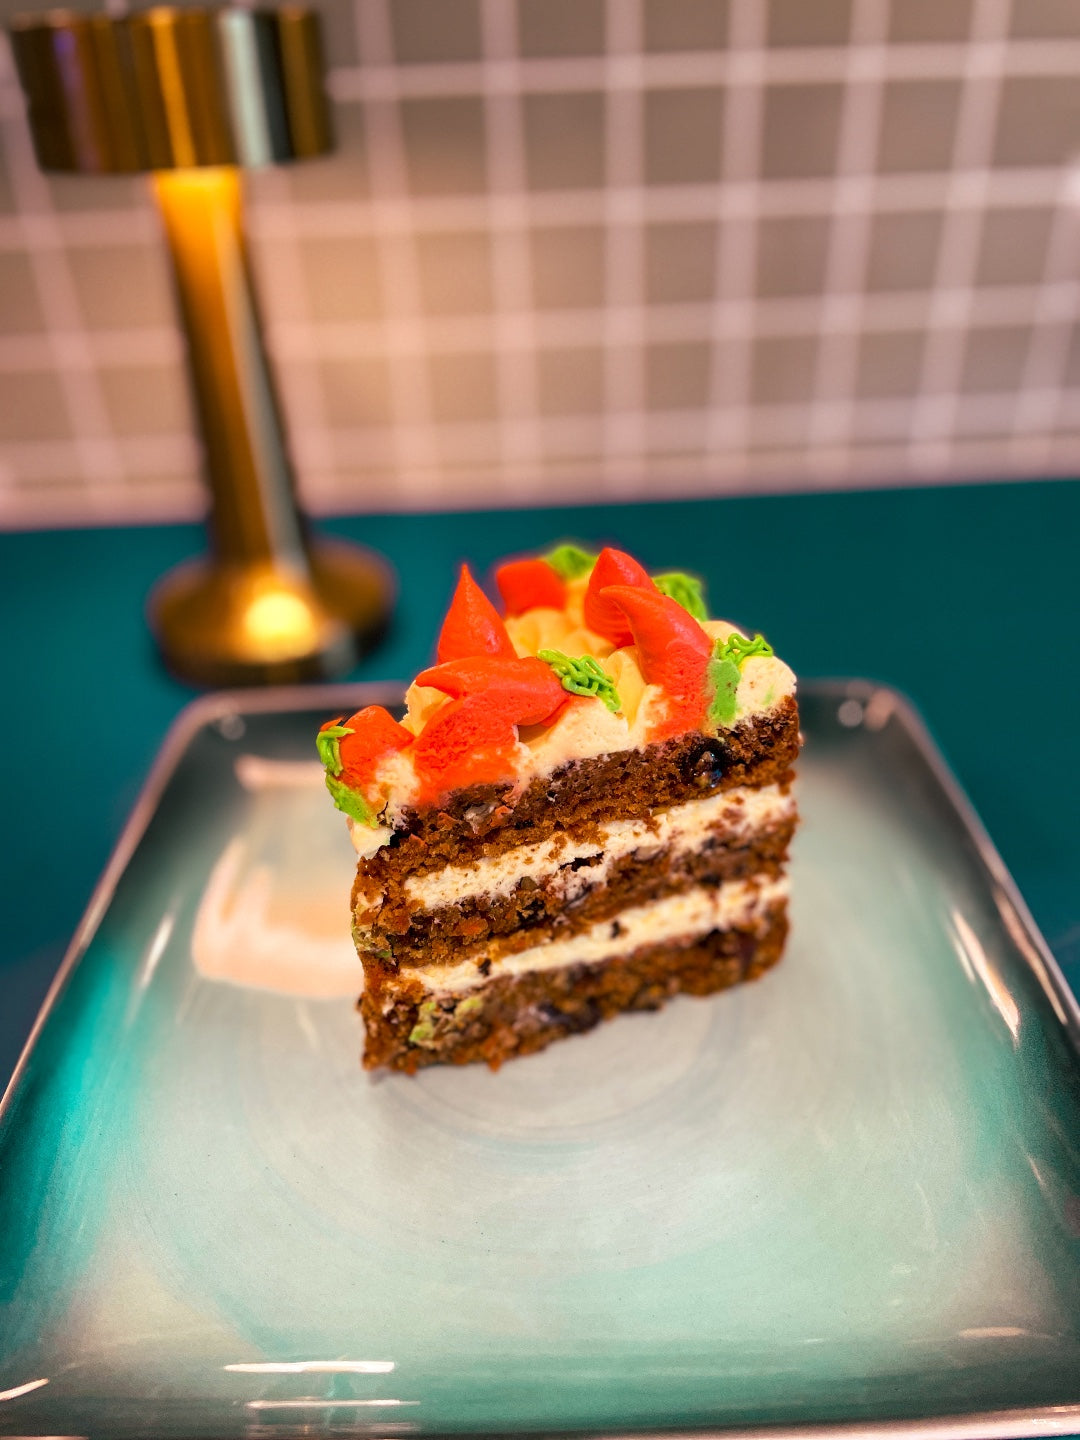 Each slice of the Bunny Carrot Cake is chock-full of grated carrots, pecans, walnuts, raisins and more.